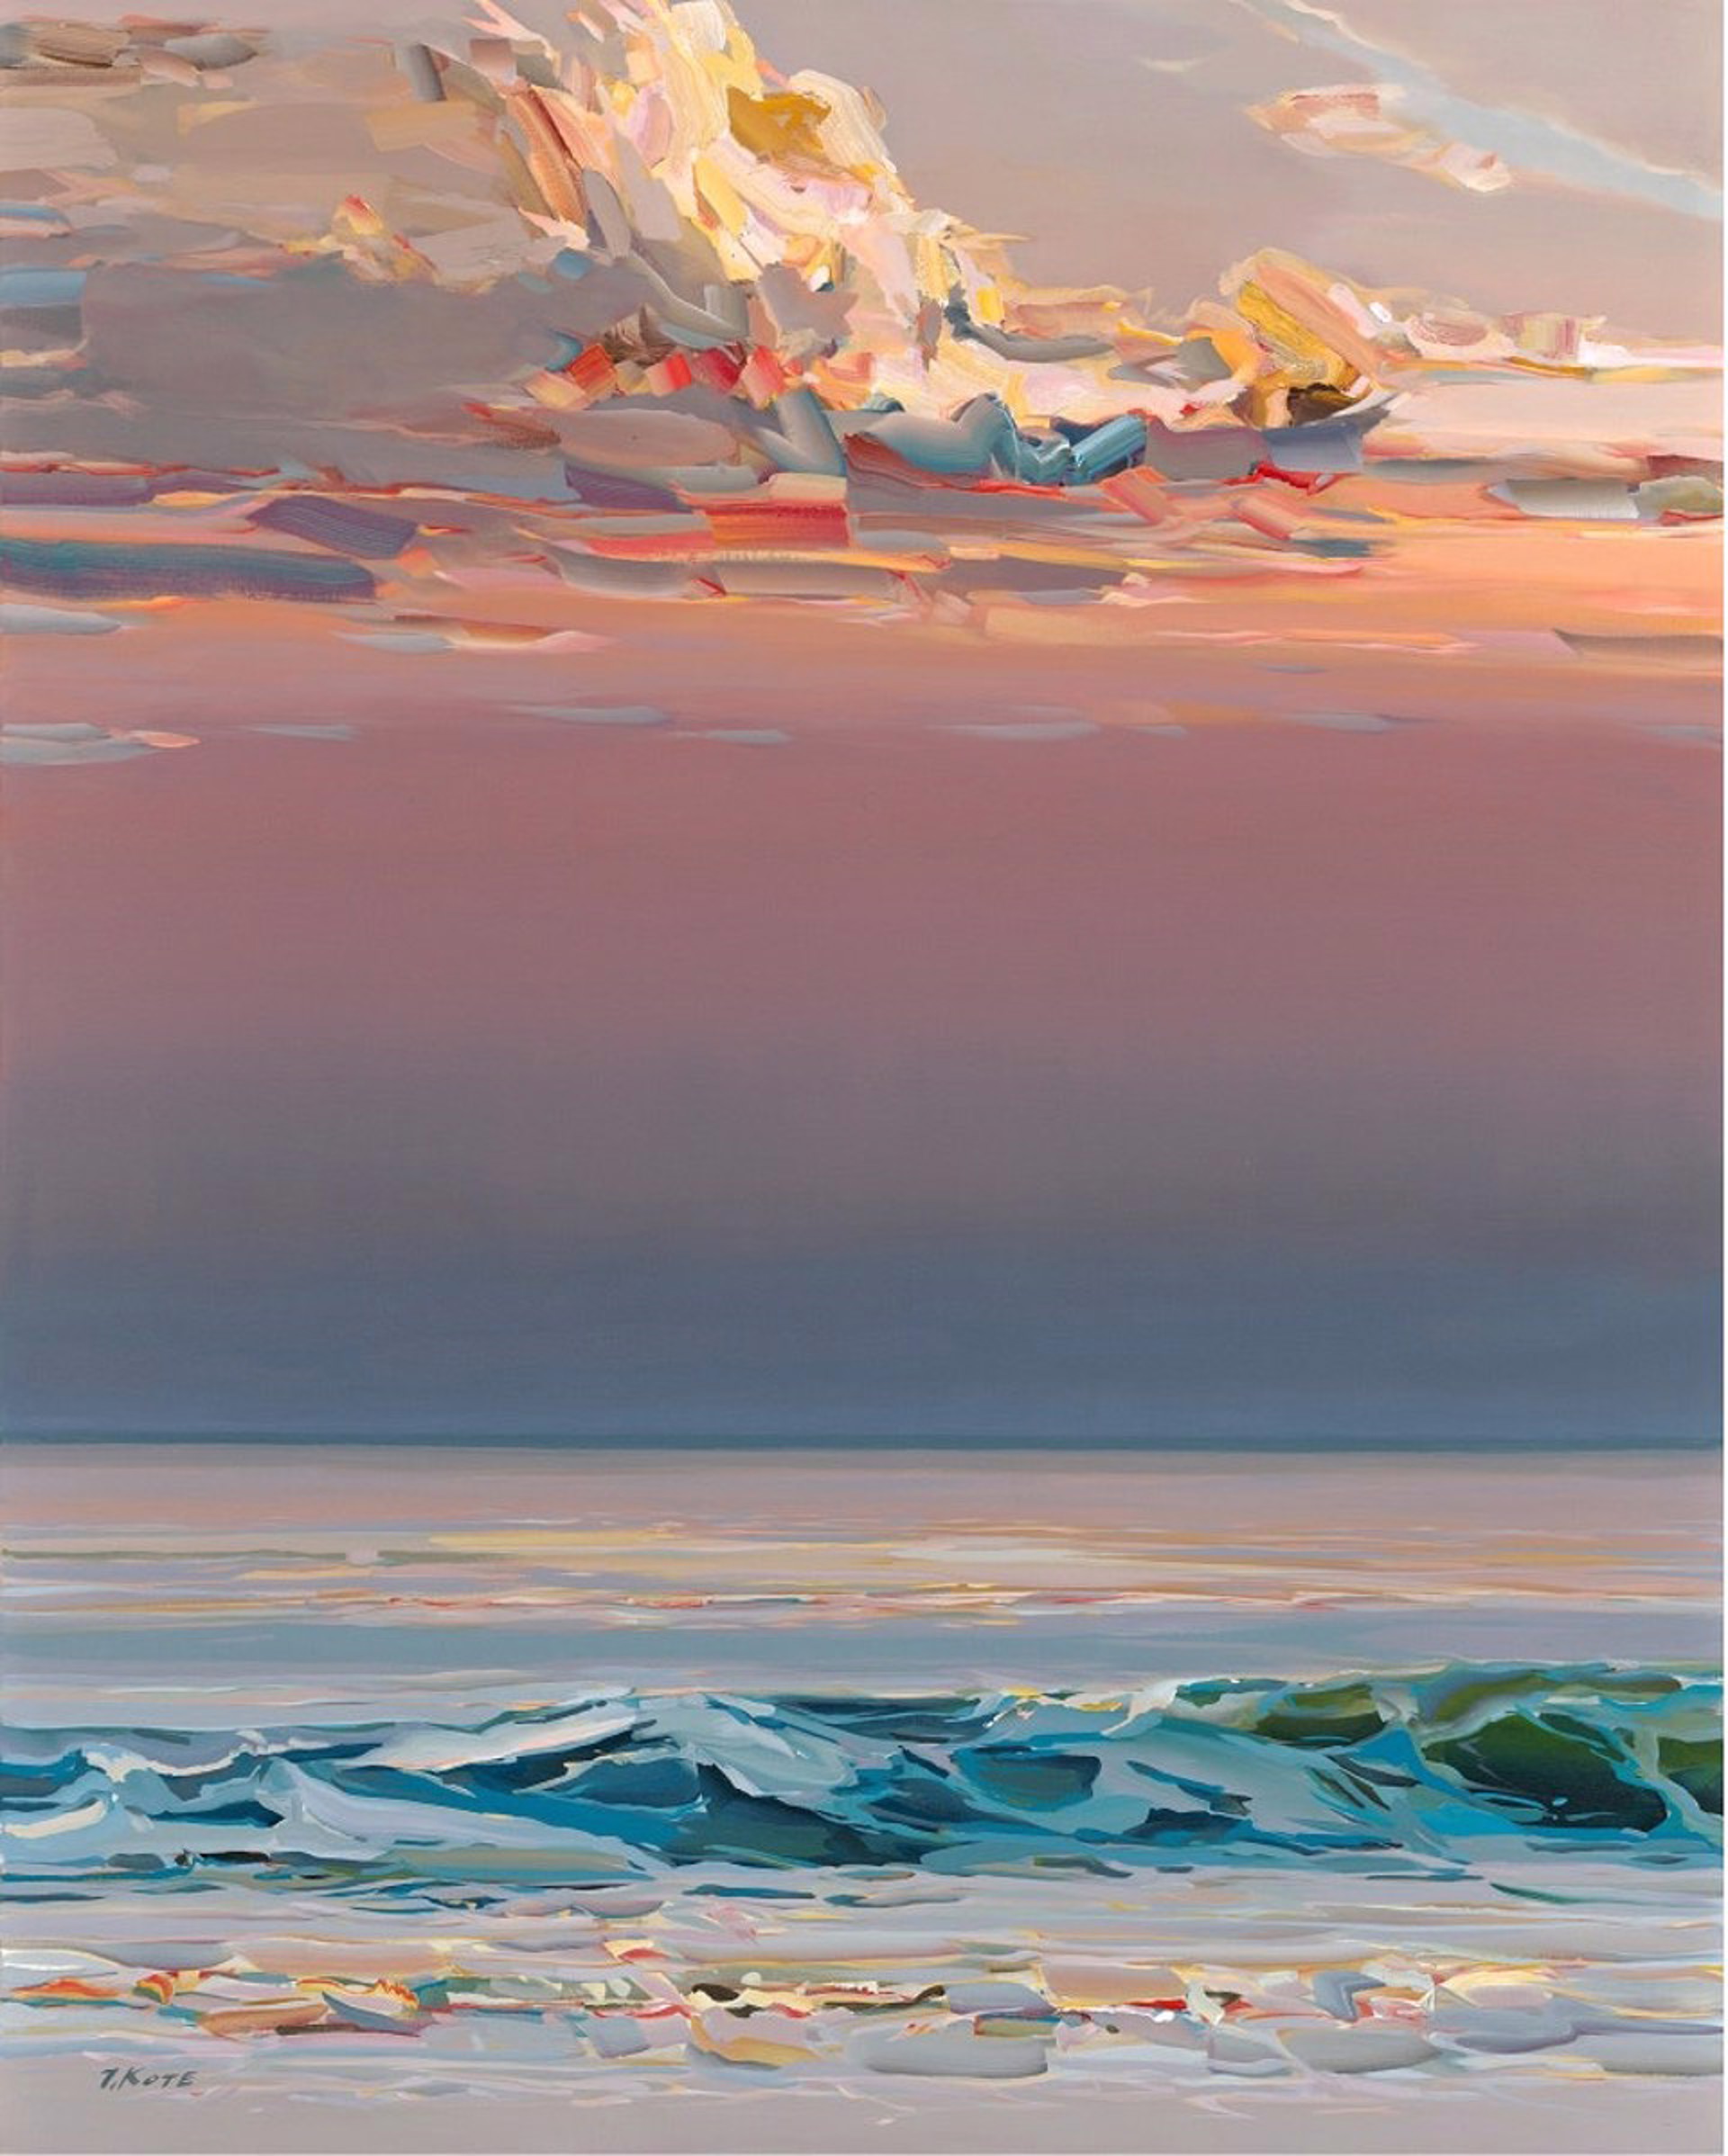 The Sun Will Set Only To Rise Again by Josef Kote